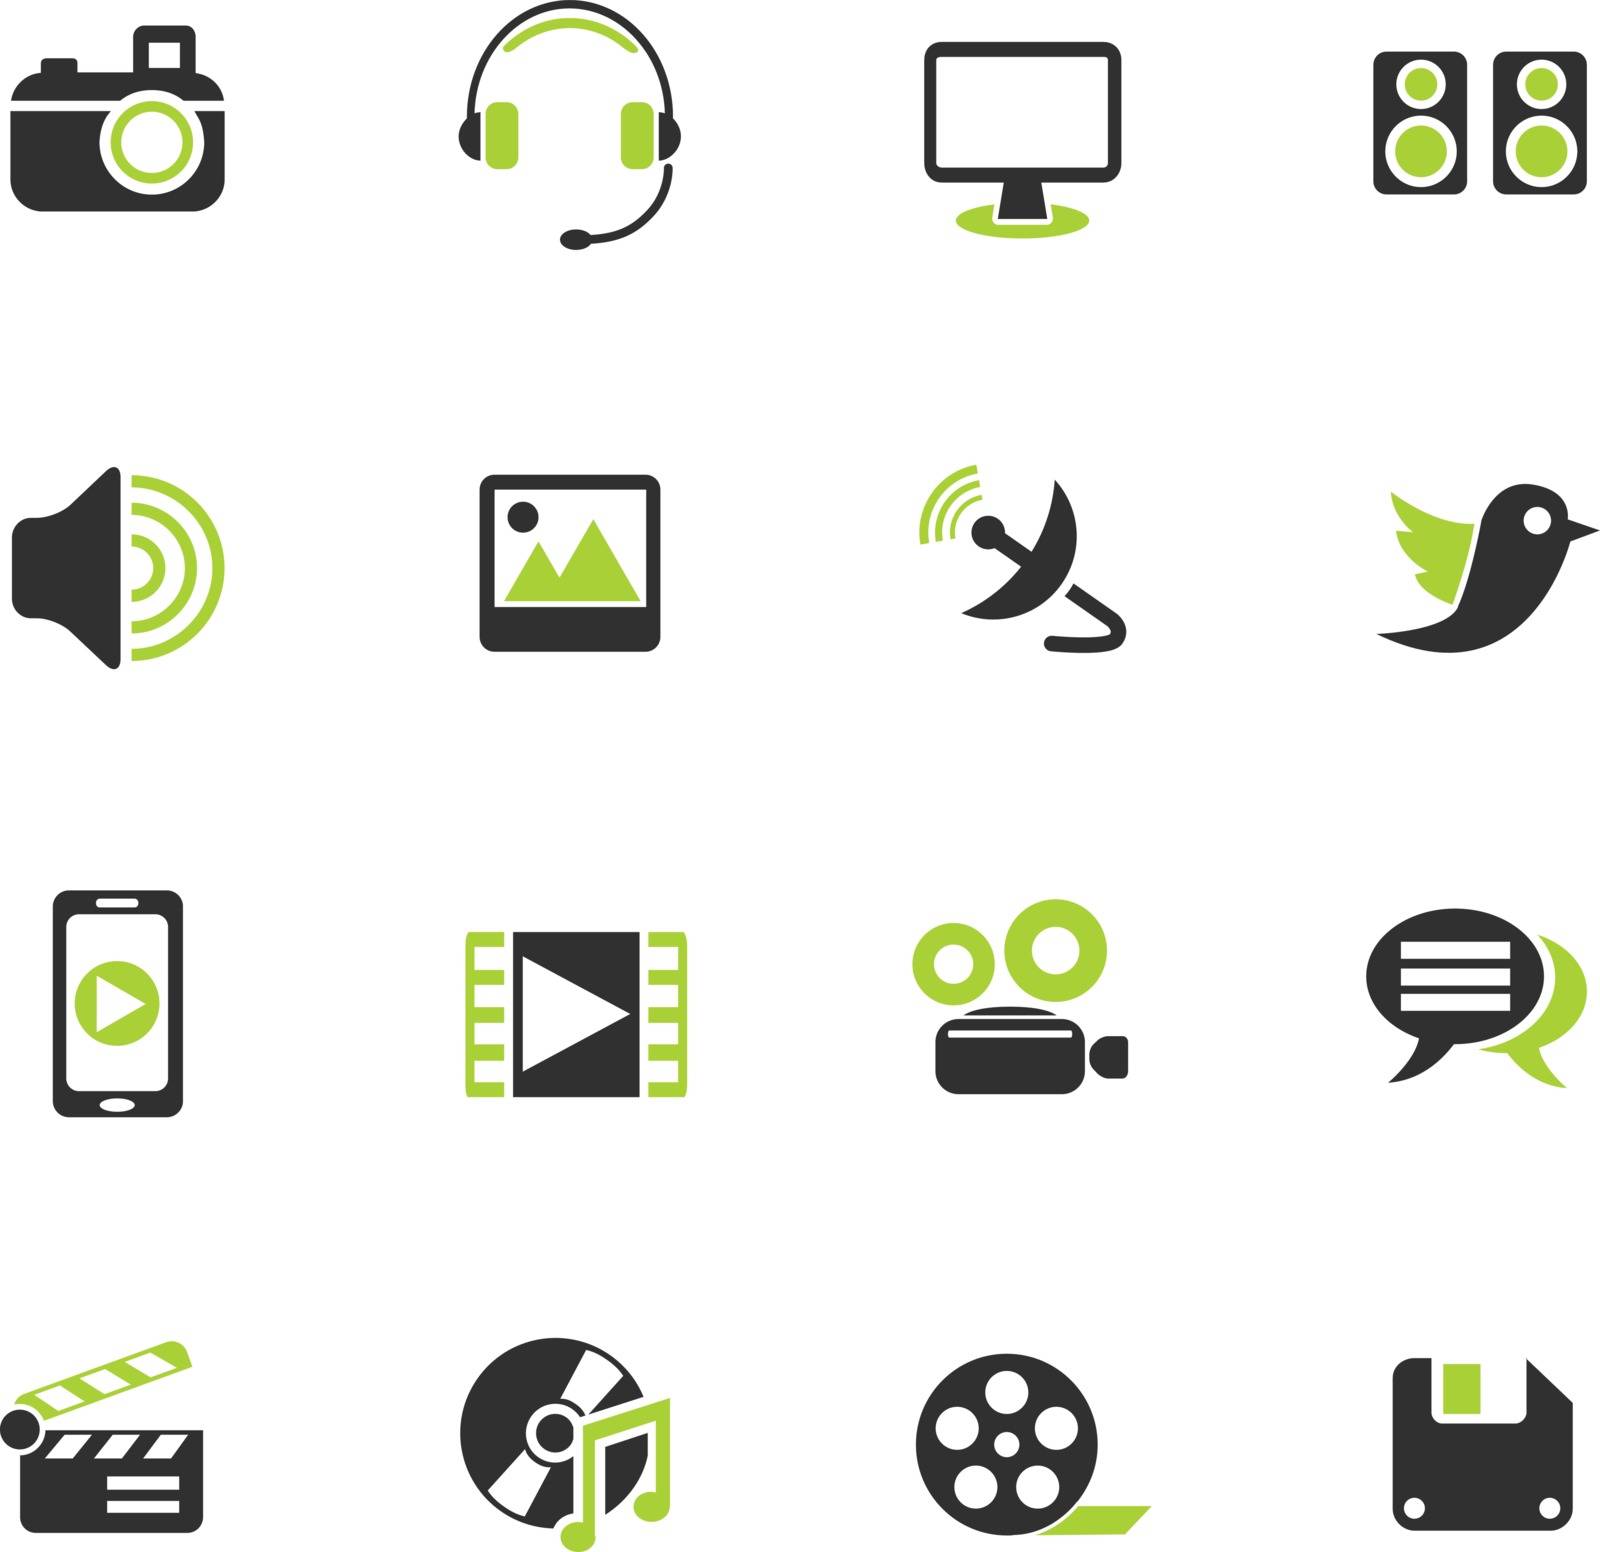 media icons web icons for user interface design